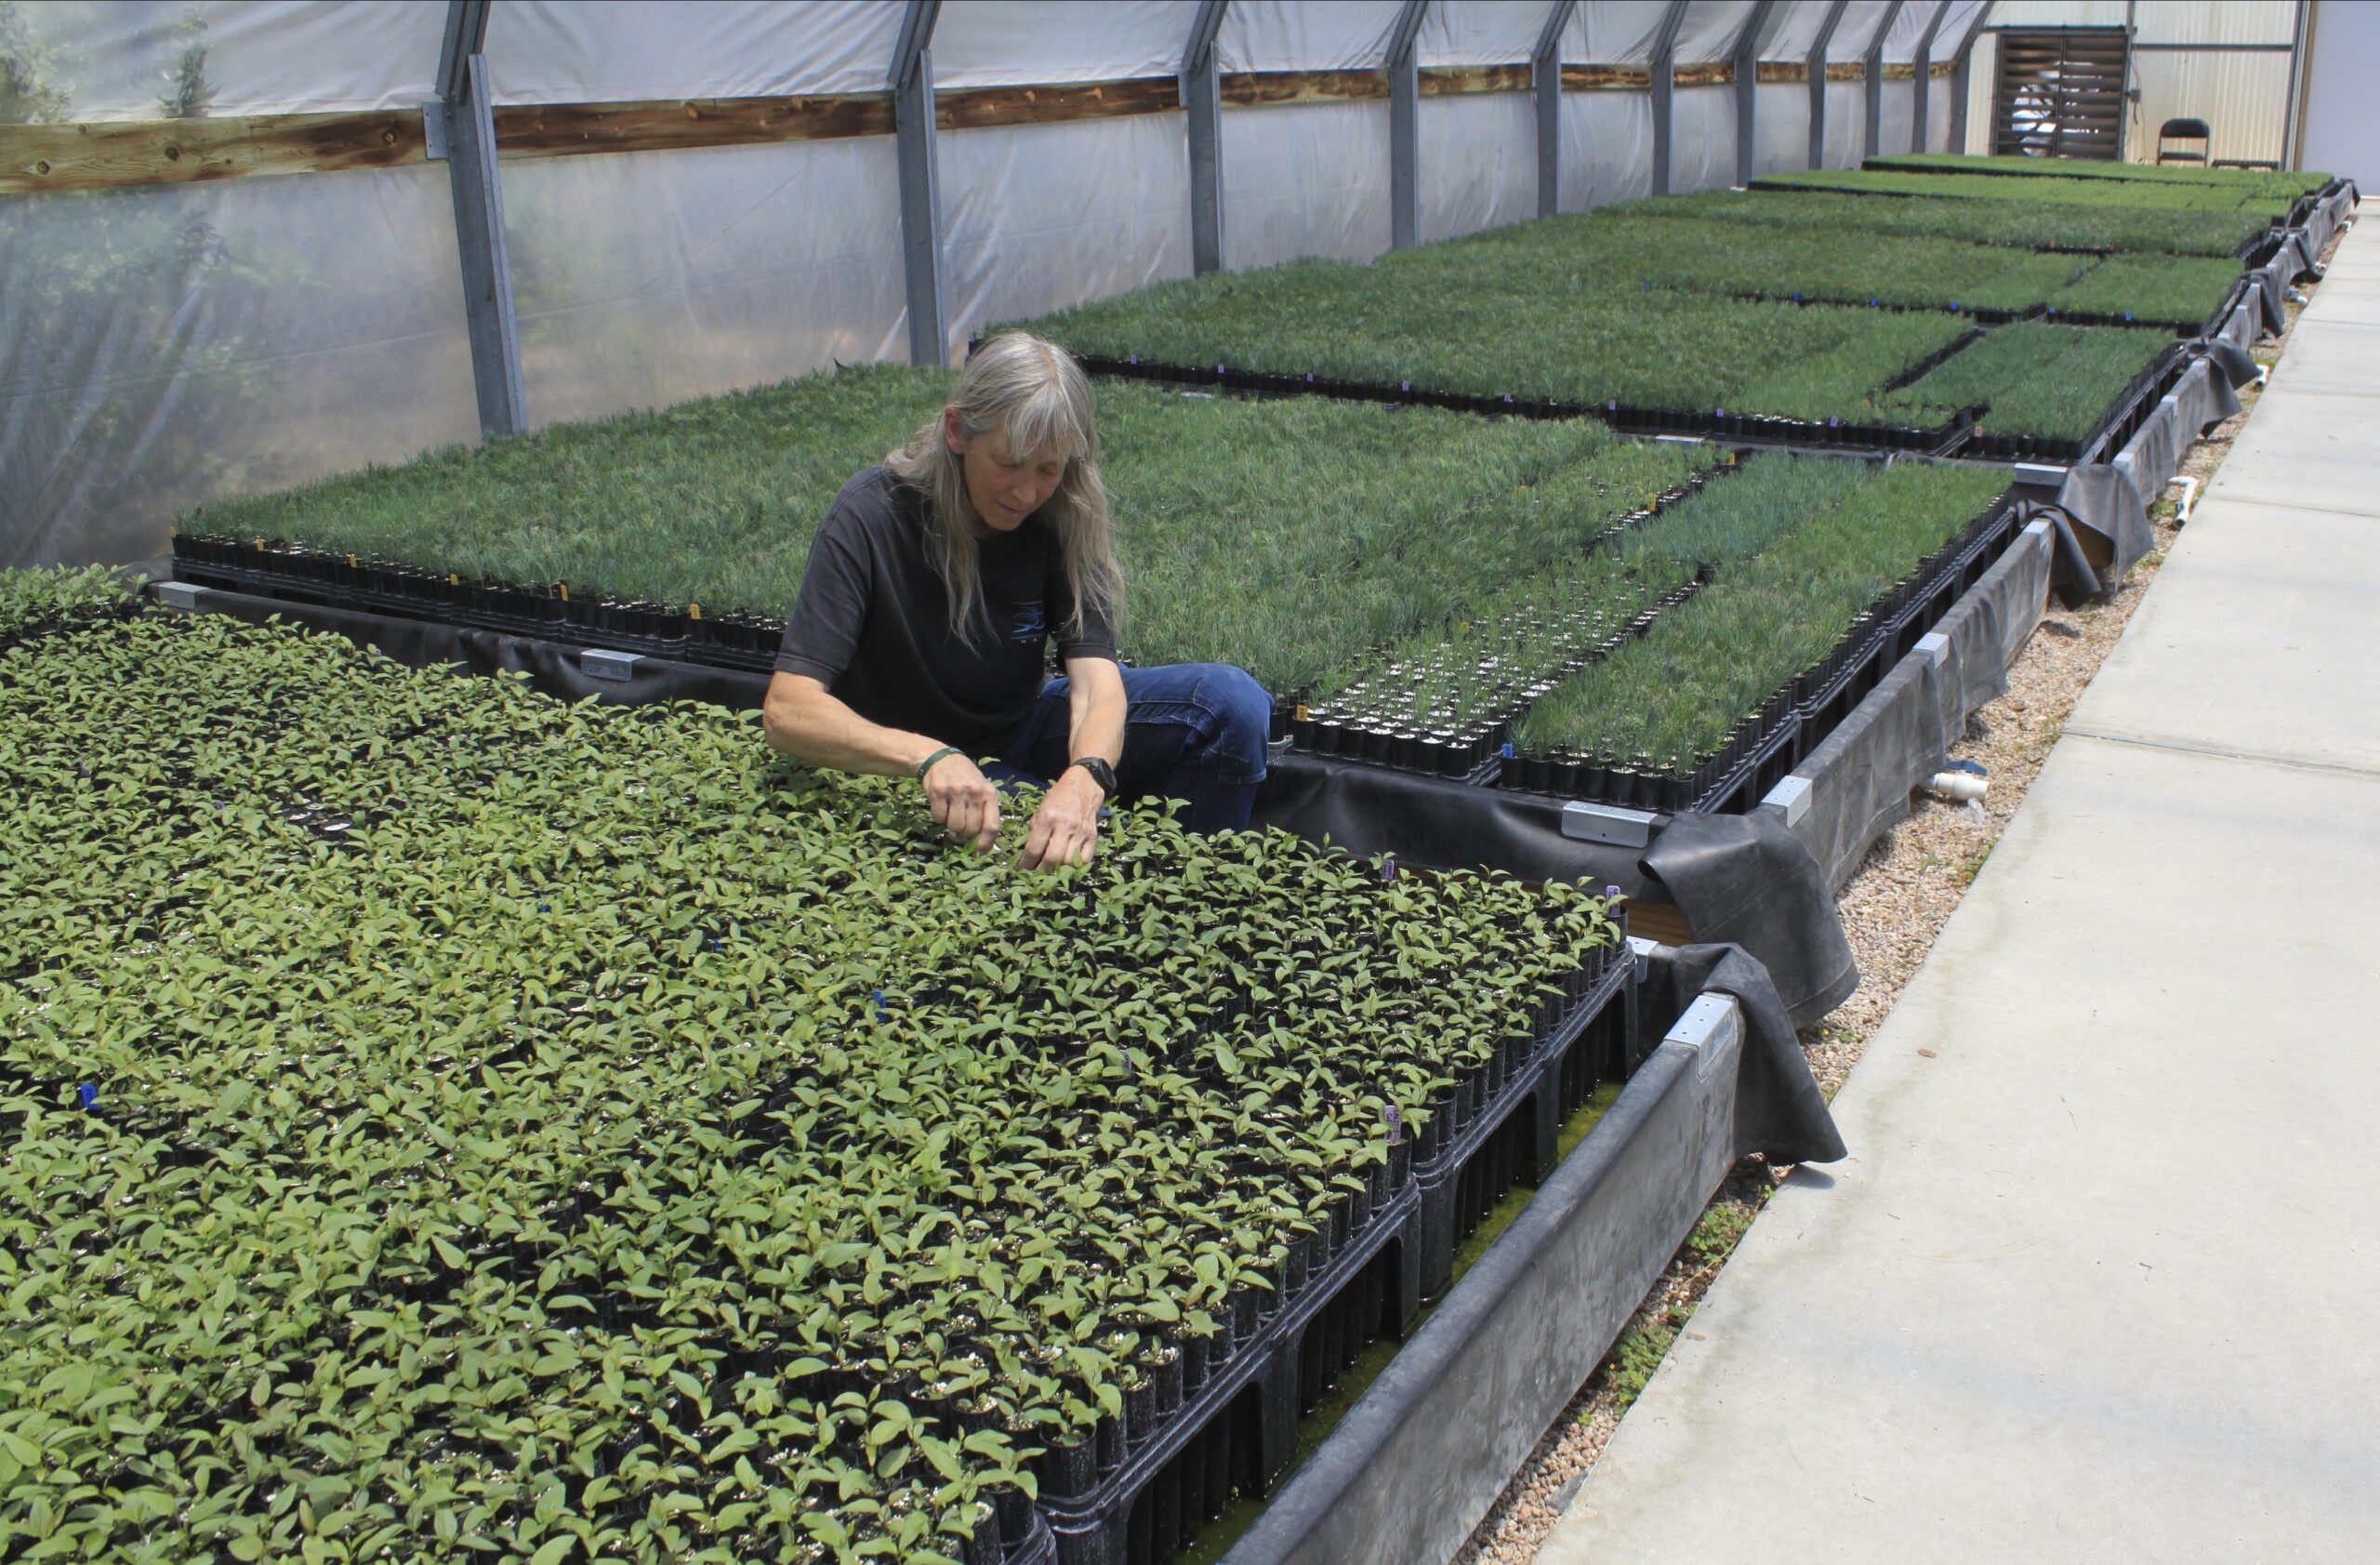 This May 18, 2022 image shows nursery manager Tammy Parsons thinning aspen seedlings at a greenhouse in Santa Fe, N.M. Parsons and her colleagues evacuated an invaluable collection of seeds and tens of thousands of seedlings from the New Mexico State University's Forestry Research Center in Mora, New Mexico, as the largest fire burning in the U.S. approached the facility. (AP Photo/Susan Montoya Bryan)